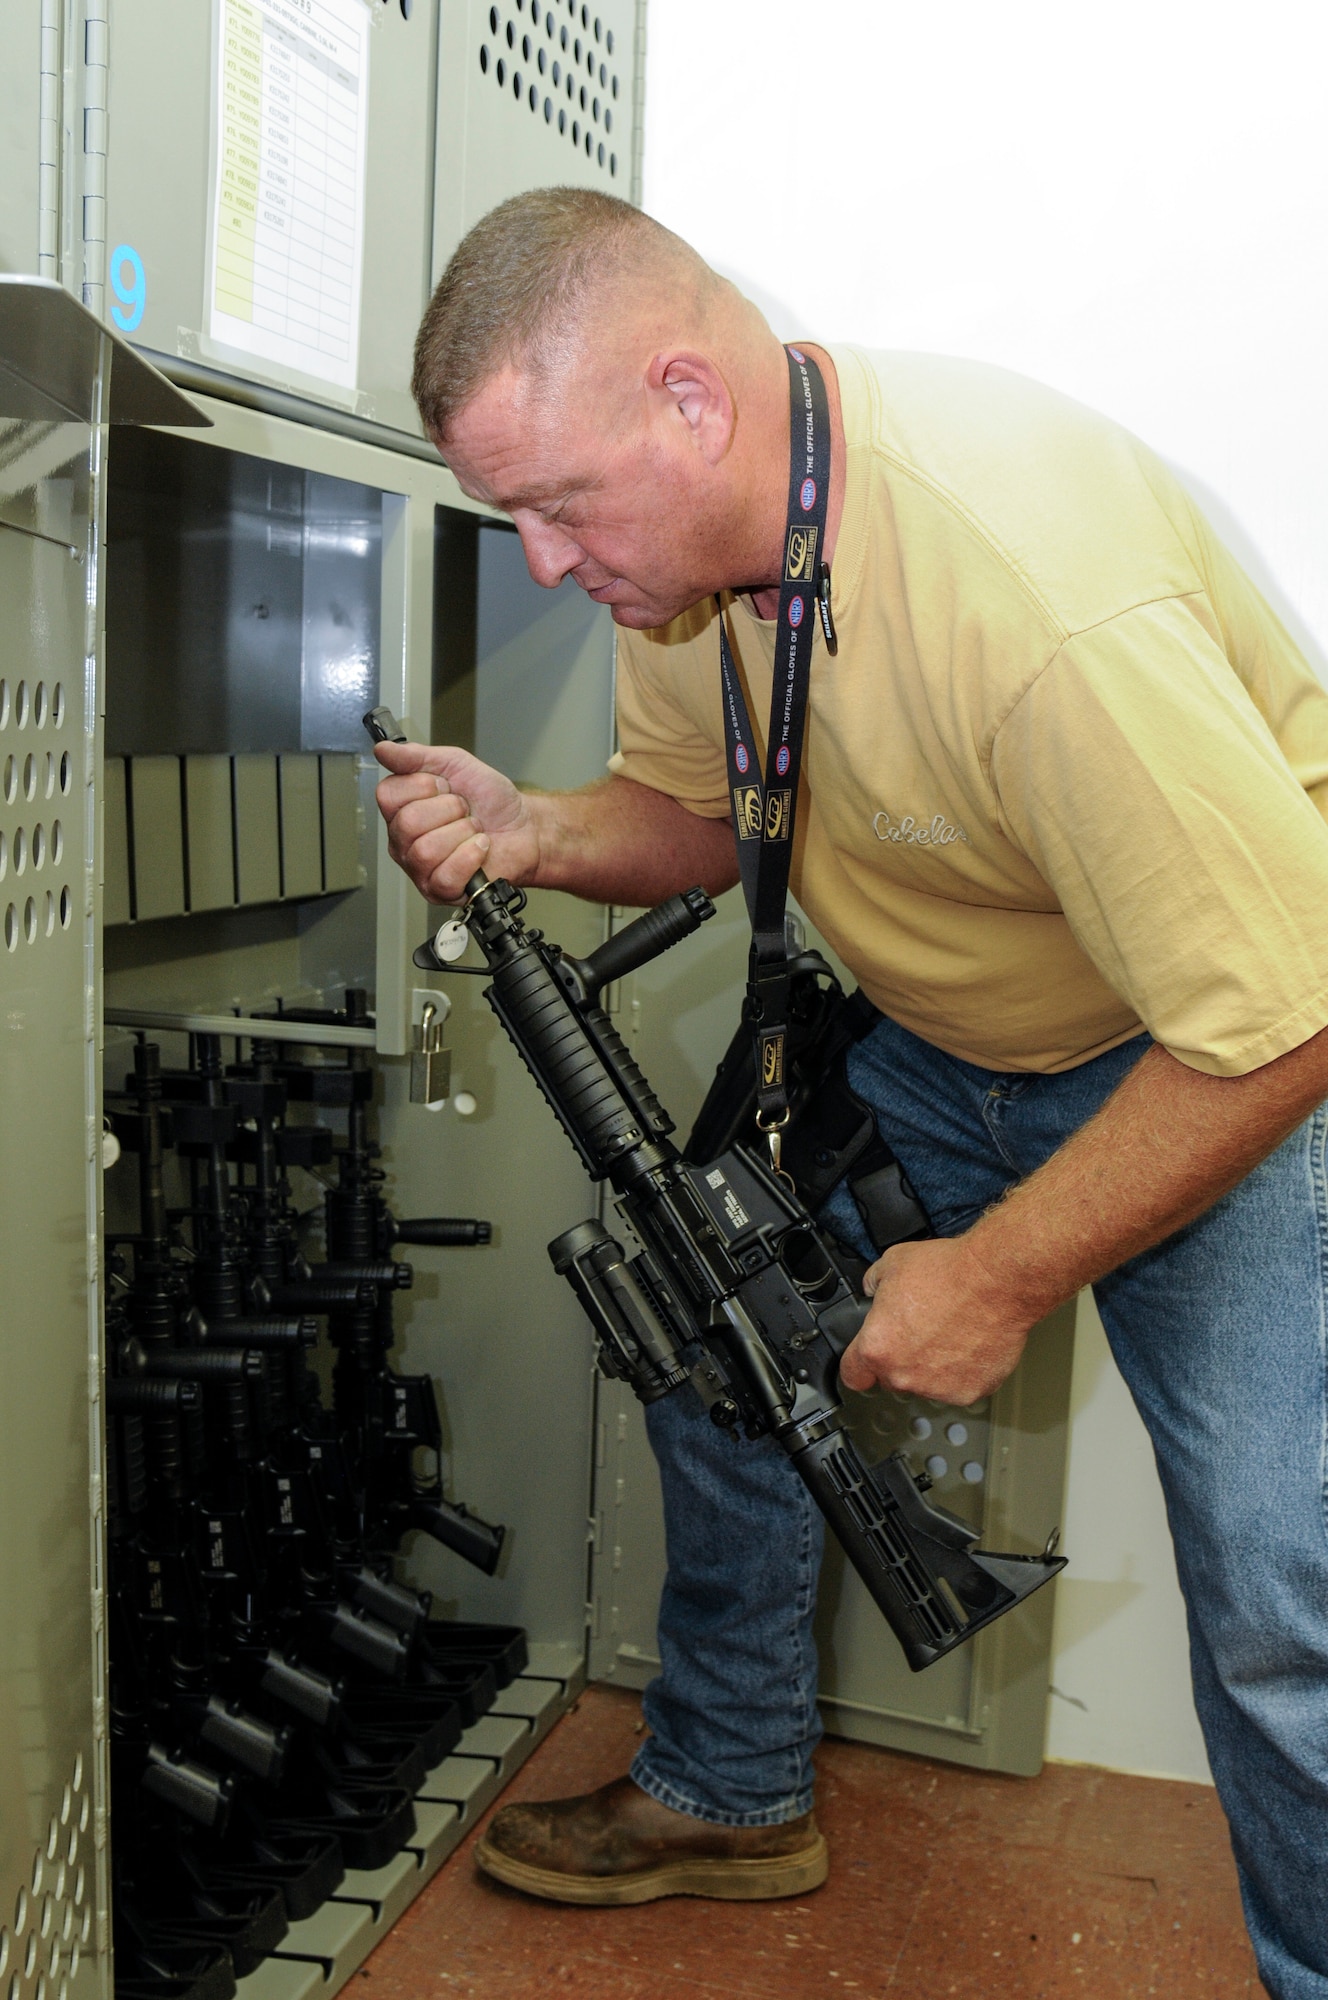 Brian Alexander, 90th Logistics Readiness Squadron materials handler, places an M-4 carbine in the armory of the 90th LRS Warehouse on F.E. Warren Air Force Base, Wyo., Sept. 2, 2015. Weapons not in use by the 90th Security Forces Group are stored by the 90th LRS. (U.S. Air Force photo by Senior Airman Jason Wiese)